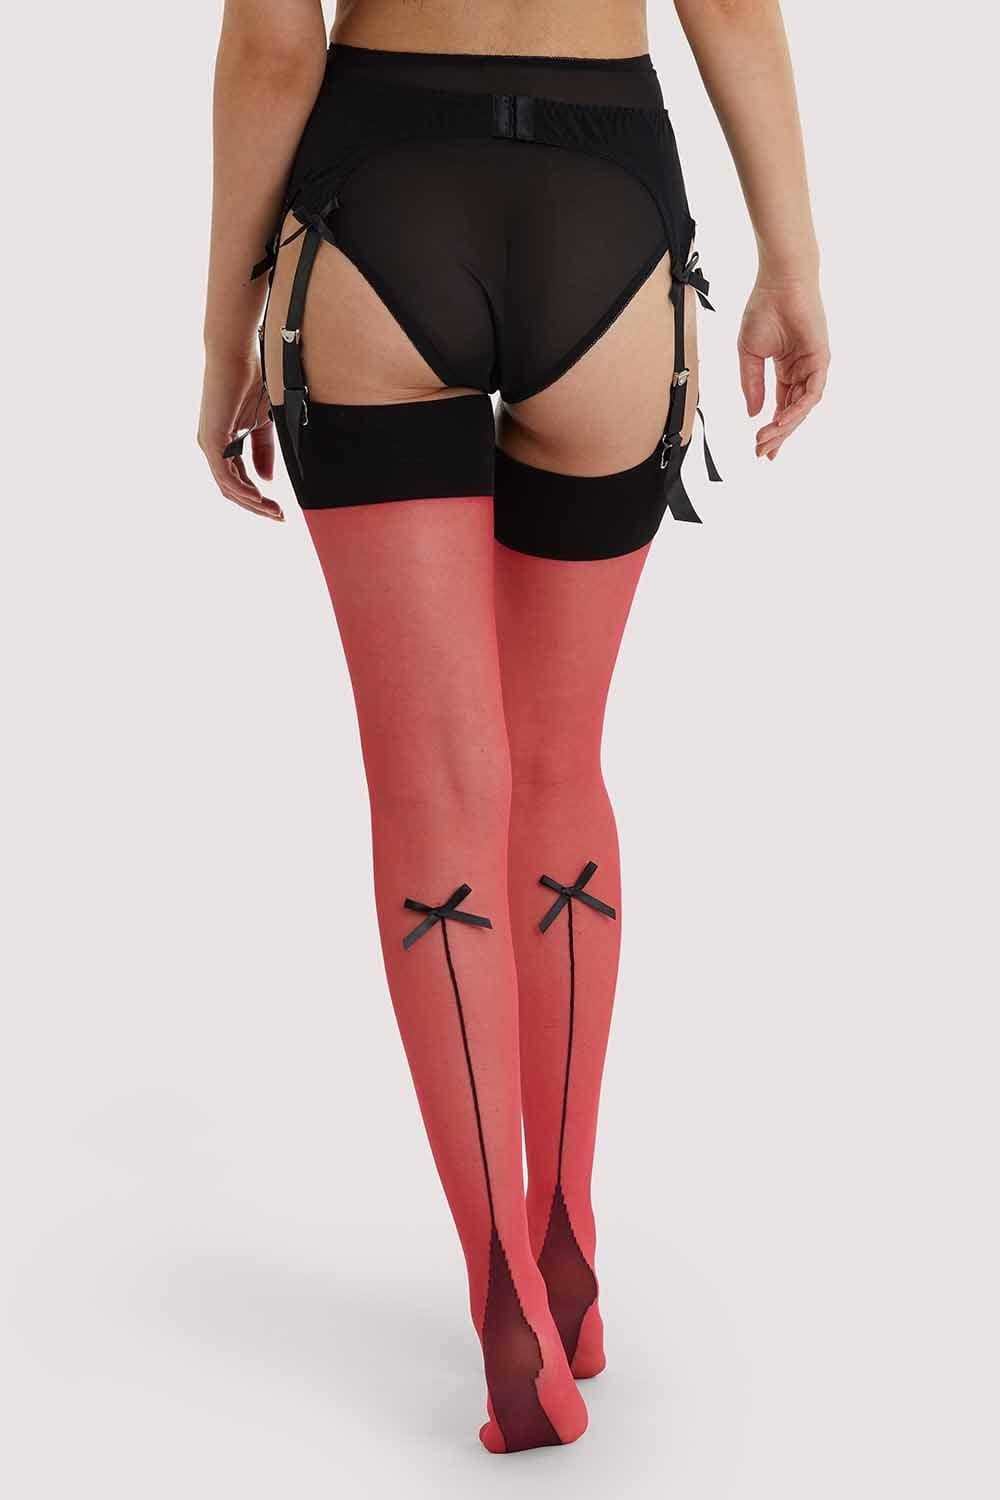 Bow Back Seamed Stockings Red